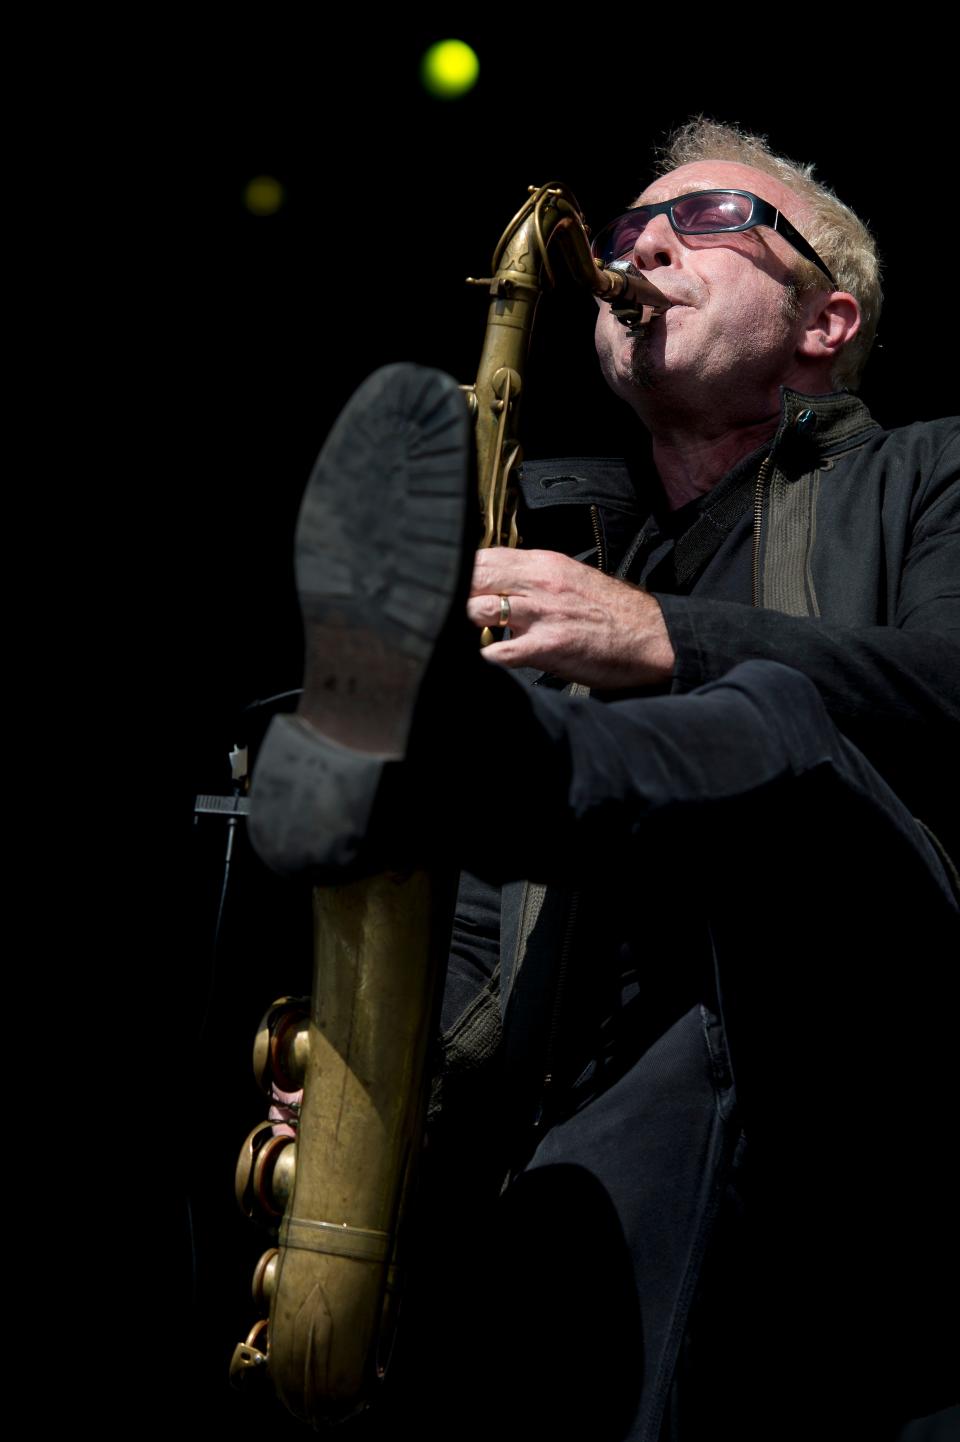 Saxophonist Mars Williams is known for his work with The Psychedelic Furs and Liquid Soul.